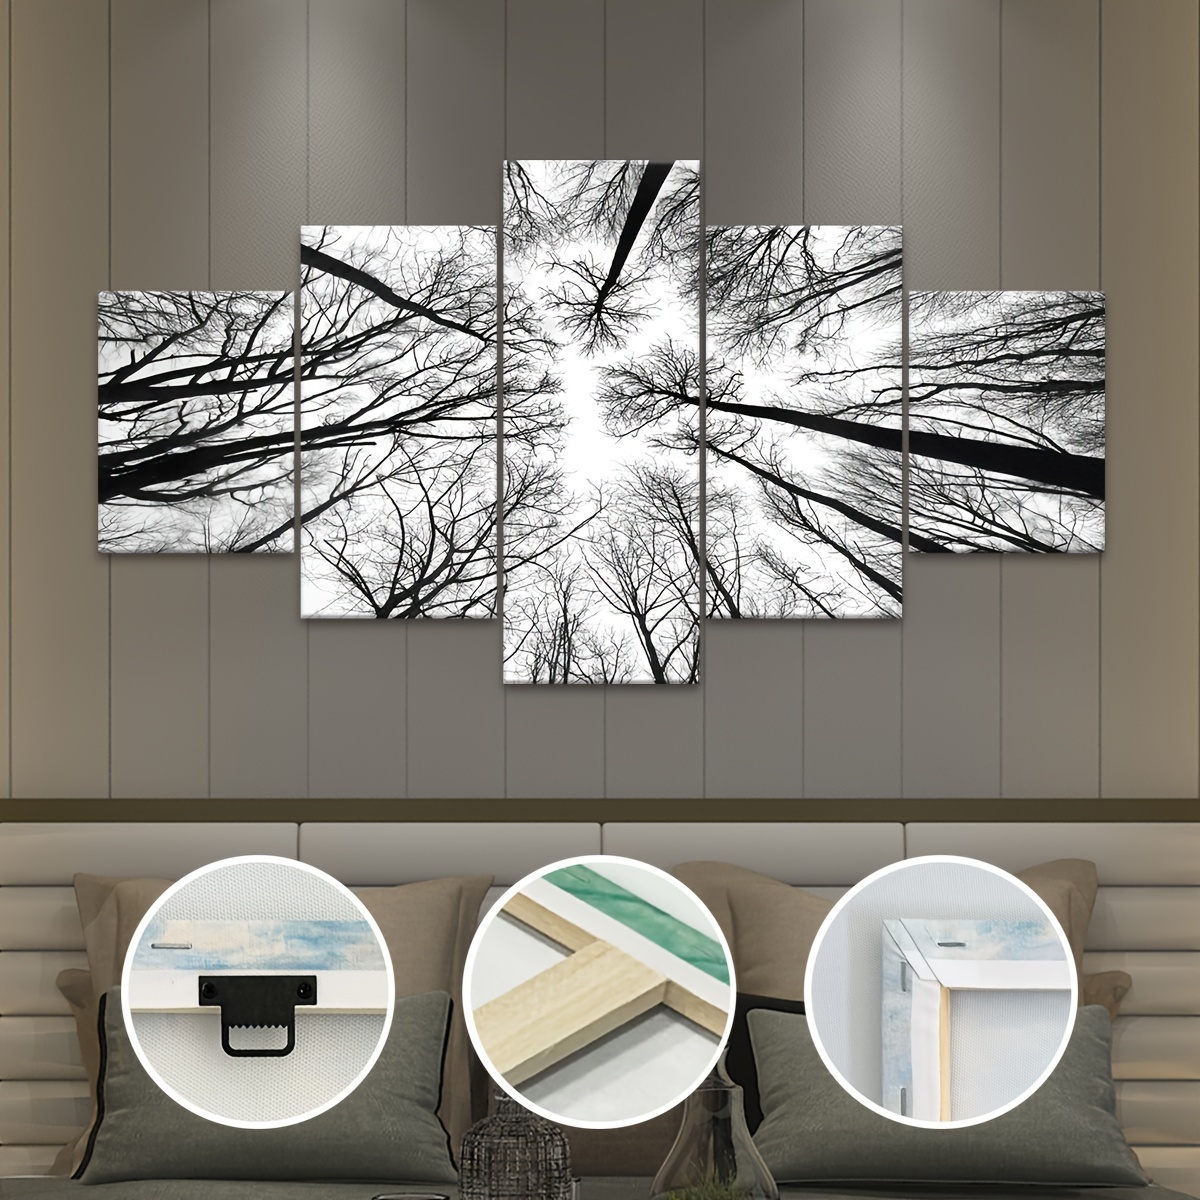 

5pcs/set Wooden Framed Canvas Poster, Modern Art, Black And White Trees Canvas Poster, Ideal Gift For Bedroom Living Room Corridor, Wall Art, Wall Decor, Winter Decor, Wall Decor, Room Decoration